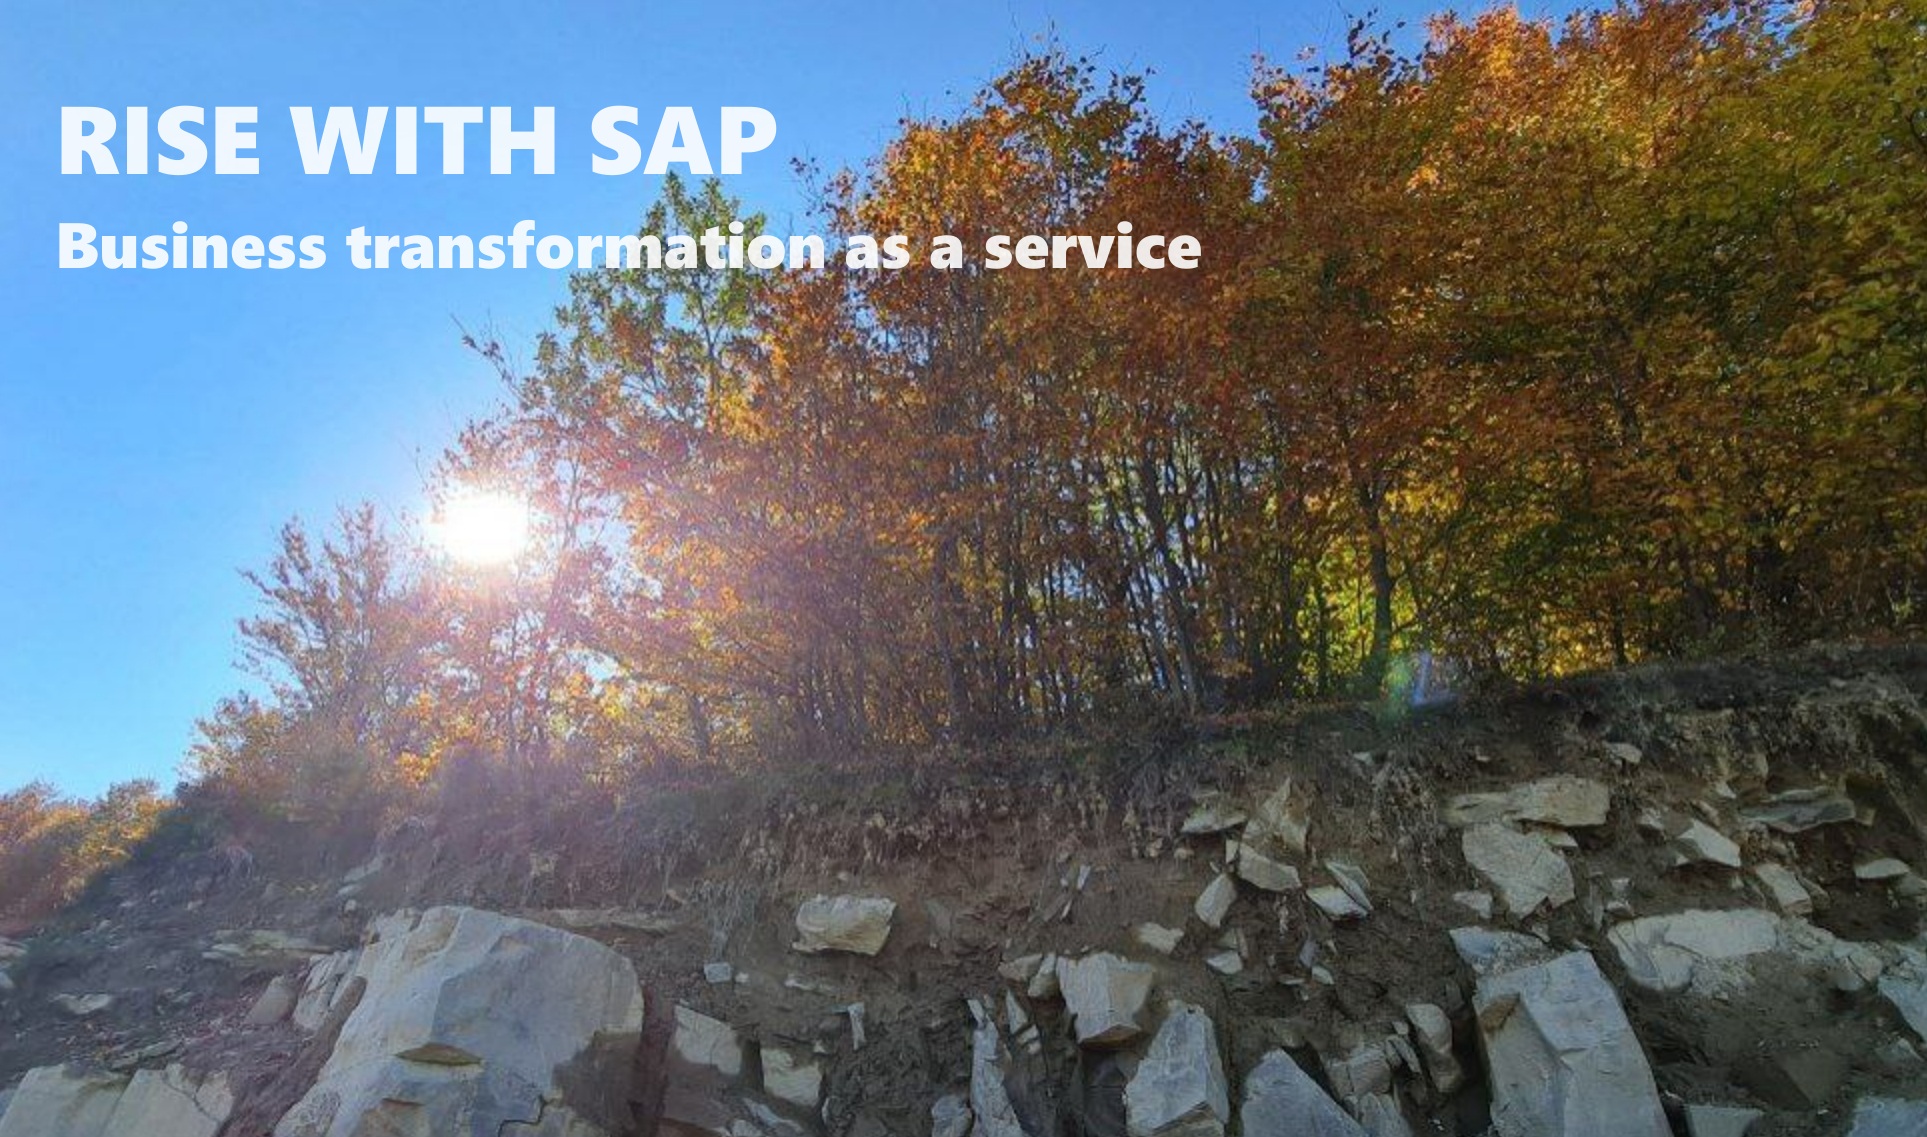 Business transformation as a service